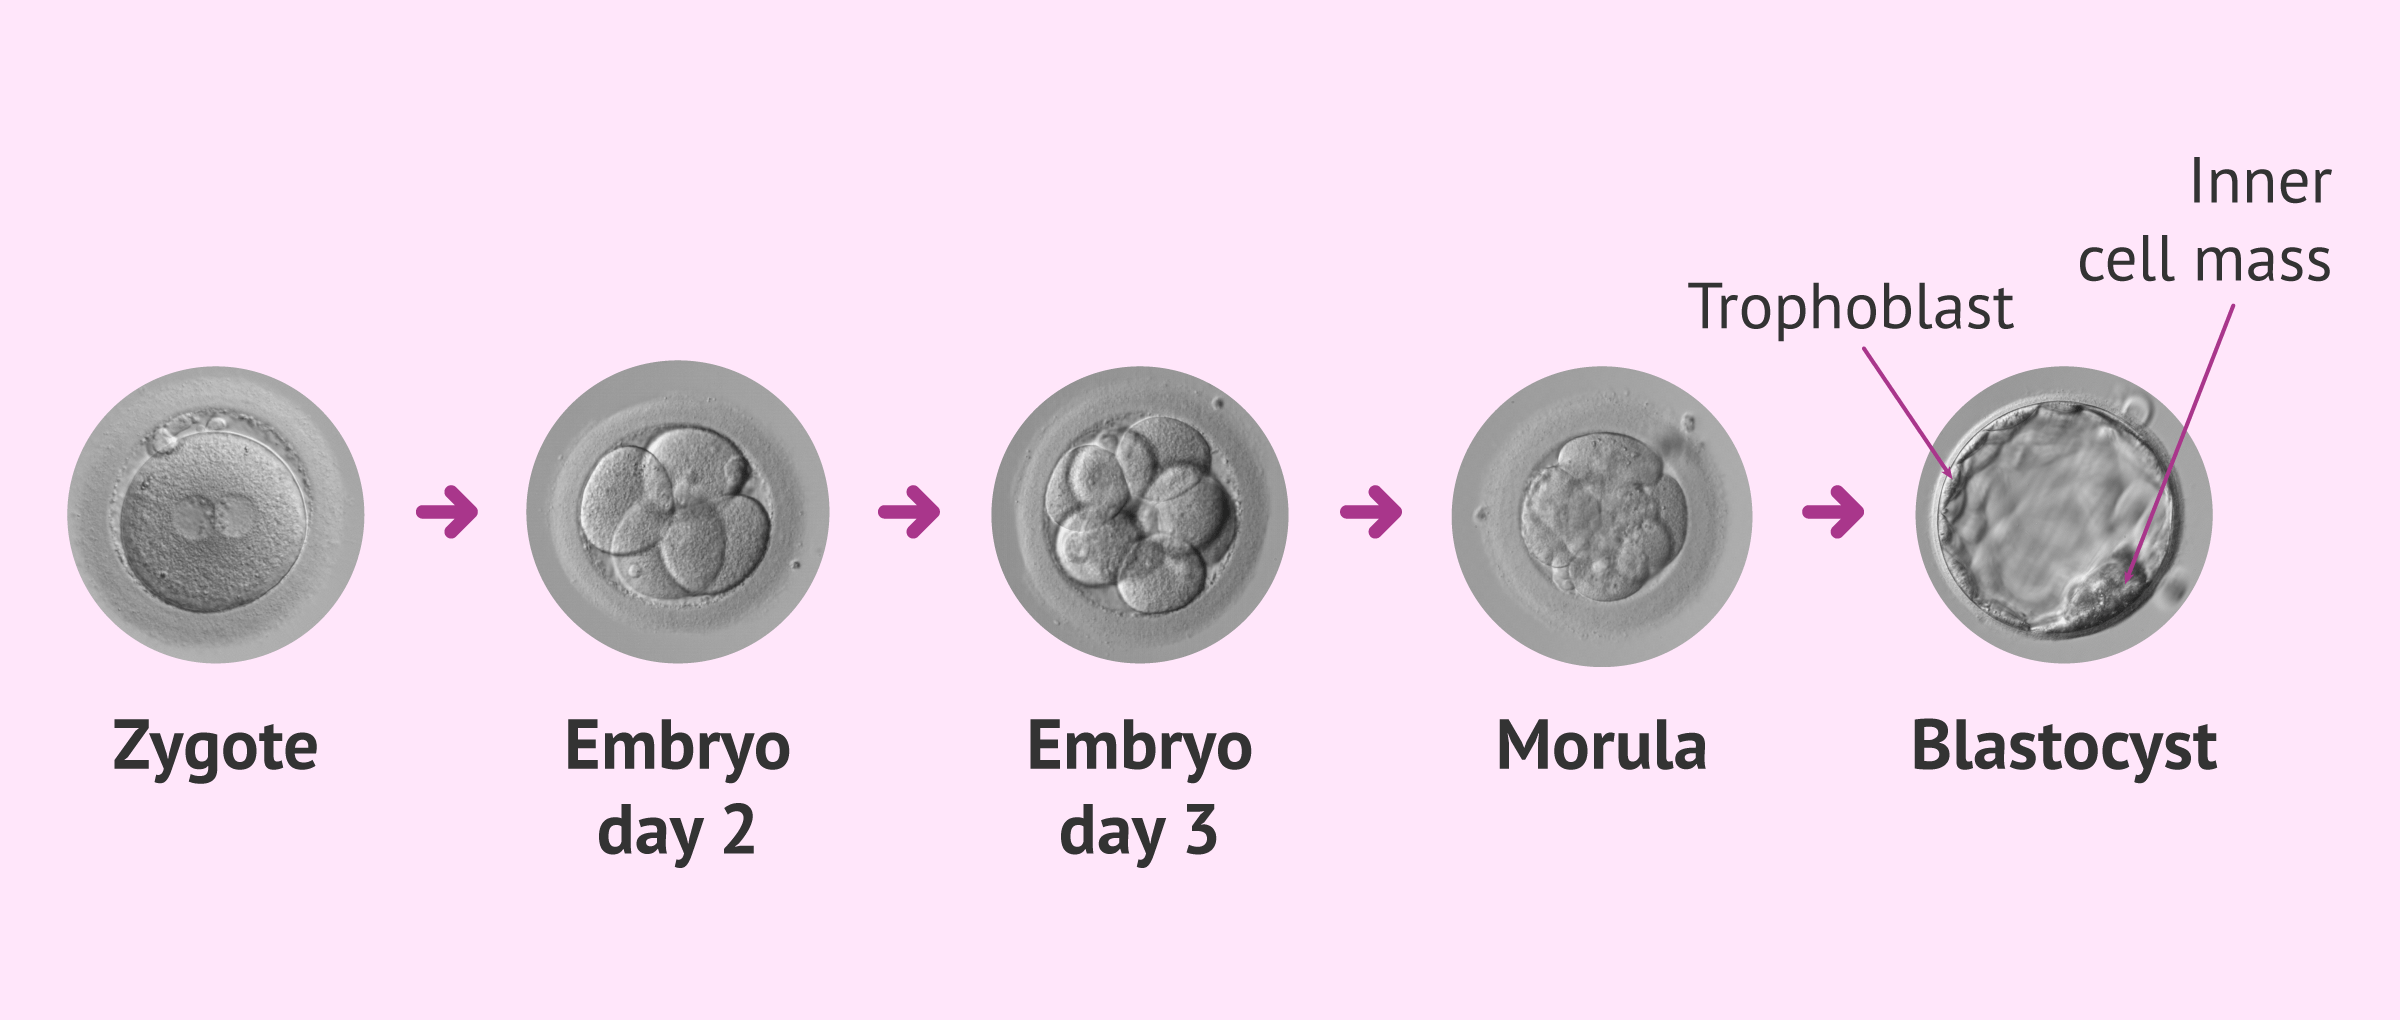 Stages of embryonic development and blastocyst structures